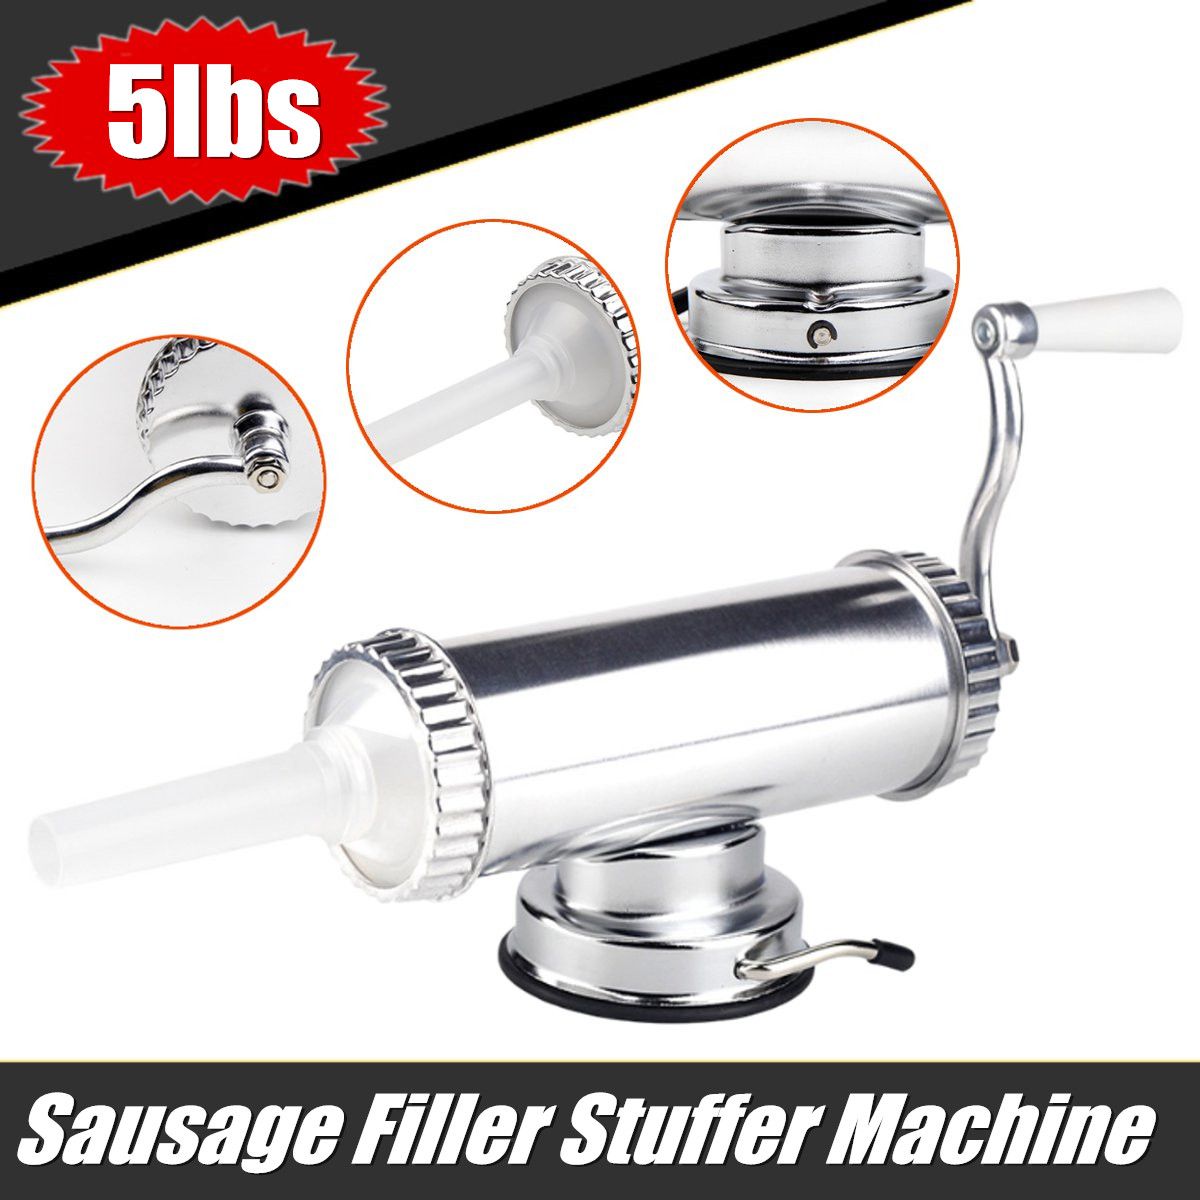 5lbs-Homemade-Meat-Sausage-Filler-Stuffer-Machine-Stainless-Steel-Sausage-Filling-Machine-Sausage-Sy-1578290